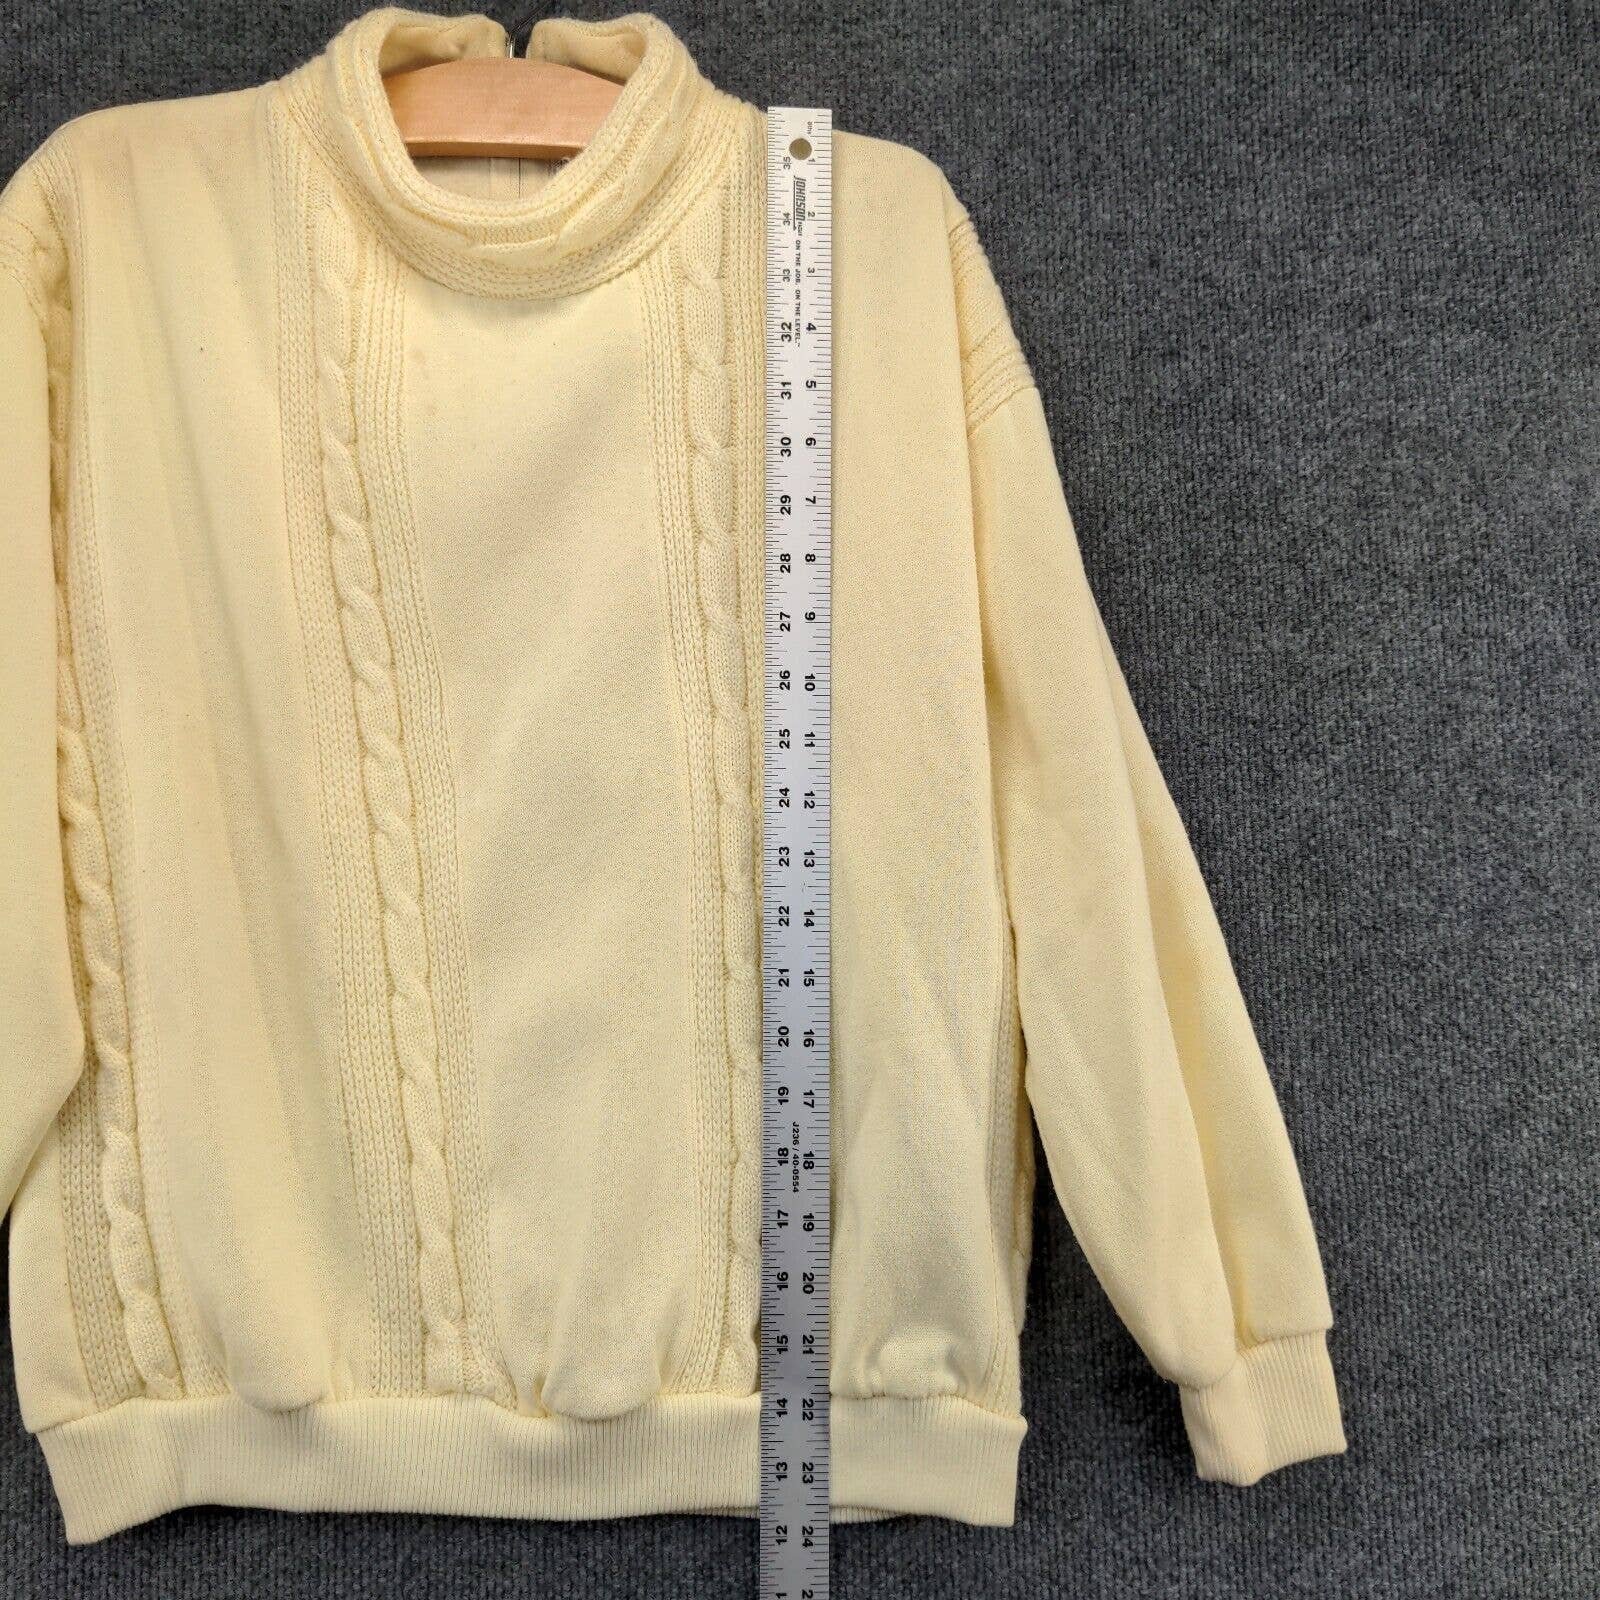 reasonable price Licorice Womens Cable Knit Pullover Sweater Cream Medium Long Sleeve Turtle Neck PmGMD82d1 just buy it